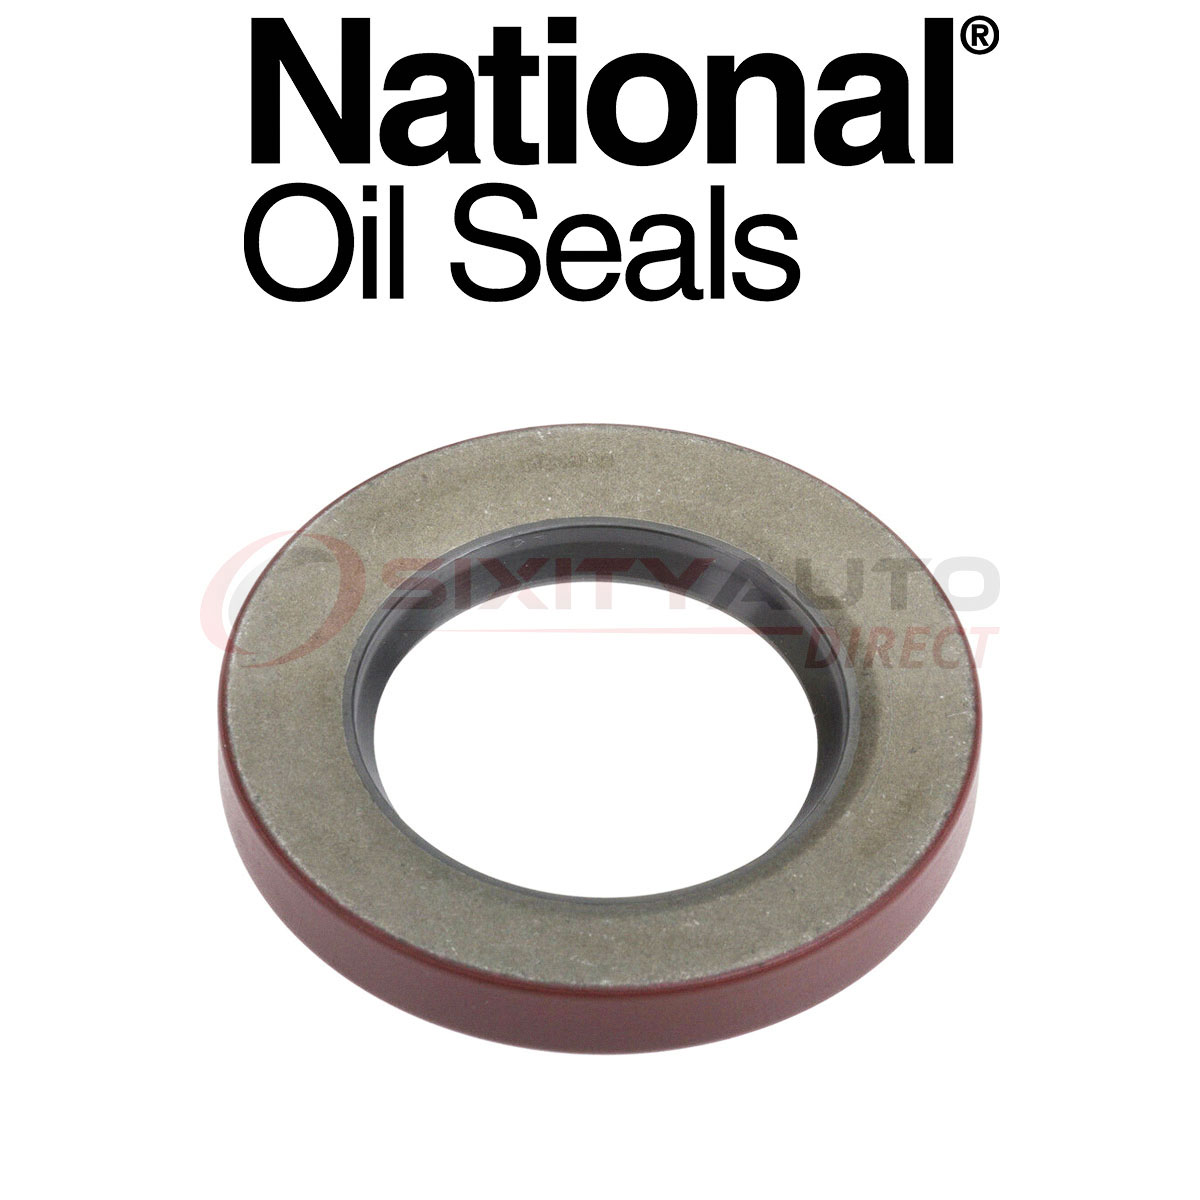 National Differential Oil Seal for 2001-2007 Chevrolet Silverado 2500 2002 Chevy 2500hd Front Differential Fluid